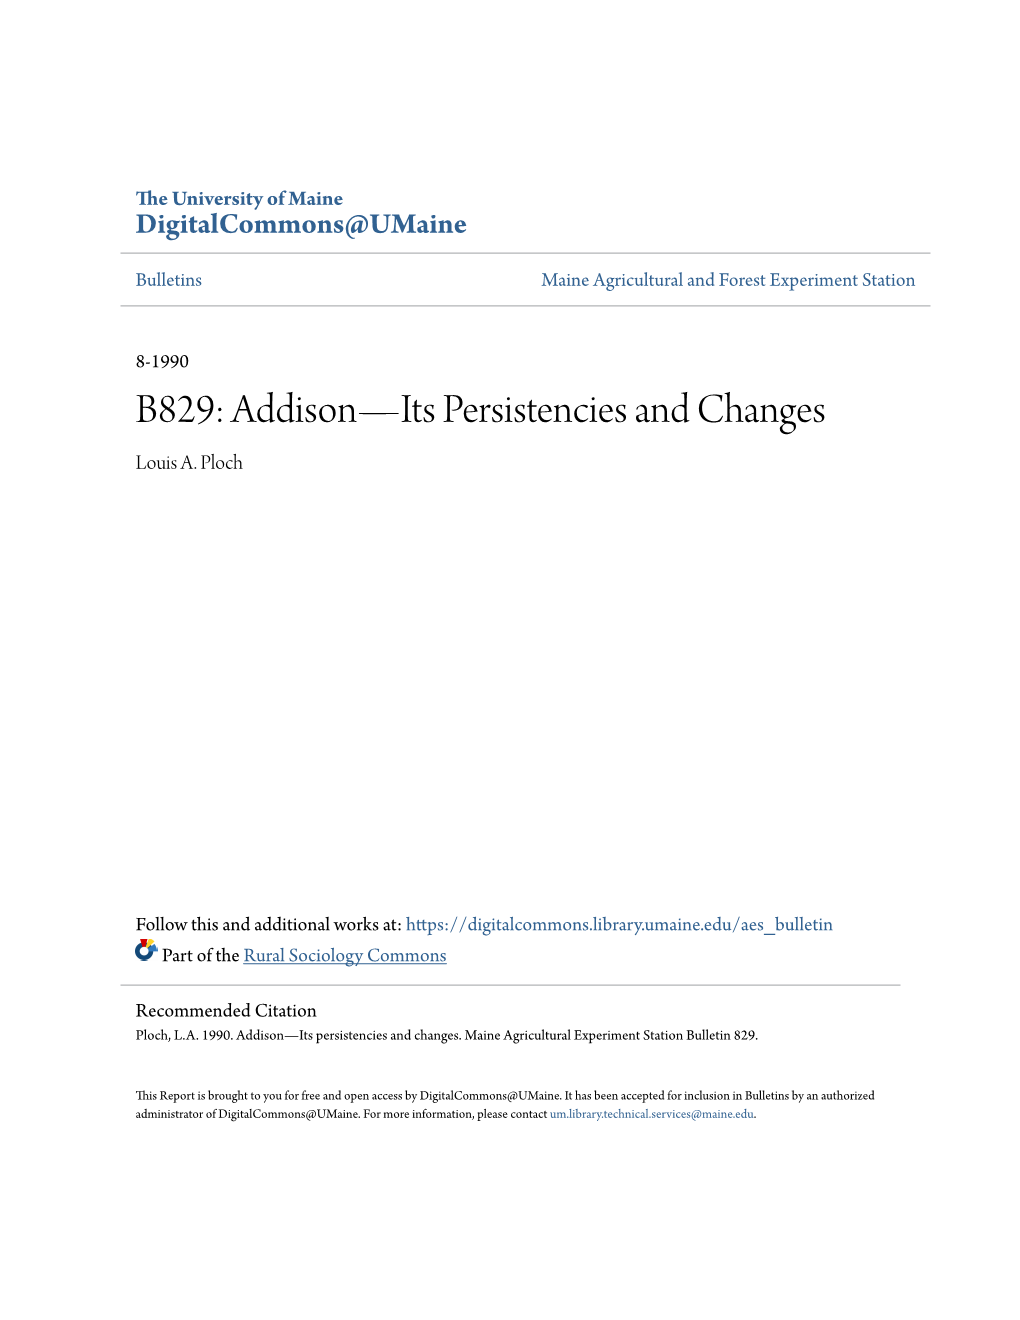 B829: Addison—Its Persistencies and Changes Louis A